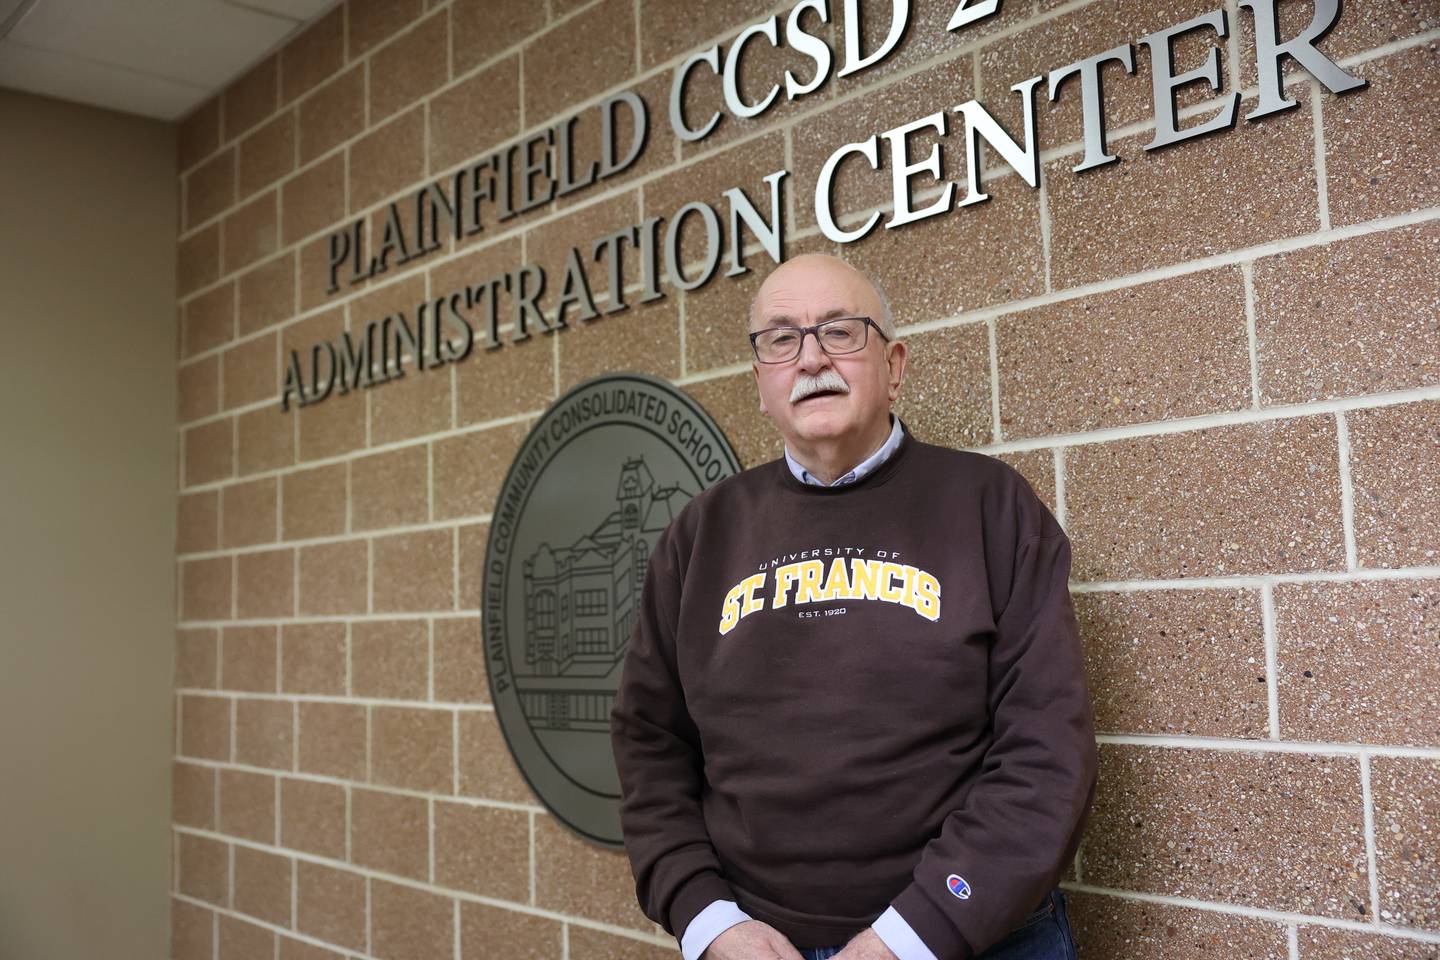 George Capps is a retired teacher and administrator in the Plainfield school district. Friday, April 8, 2022, in Plainfield.